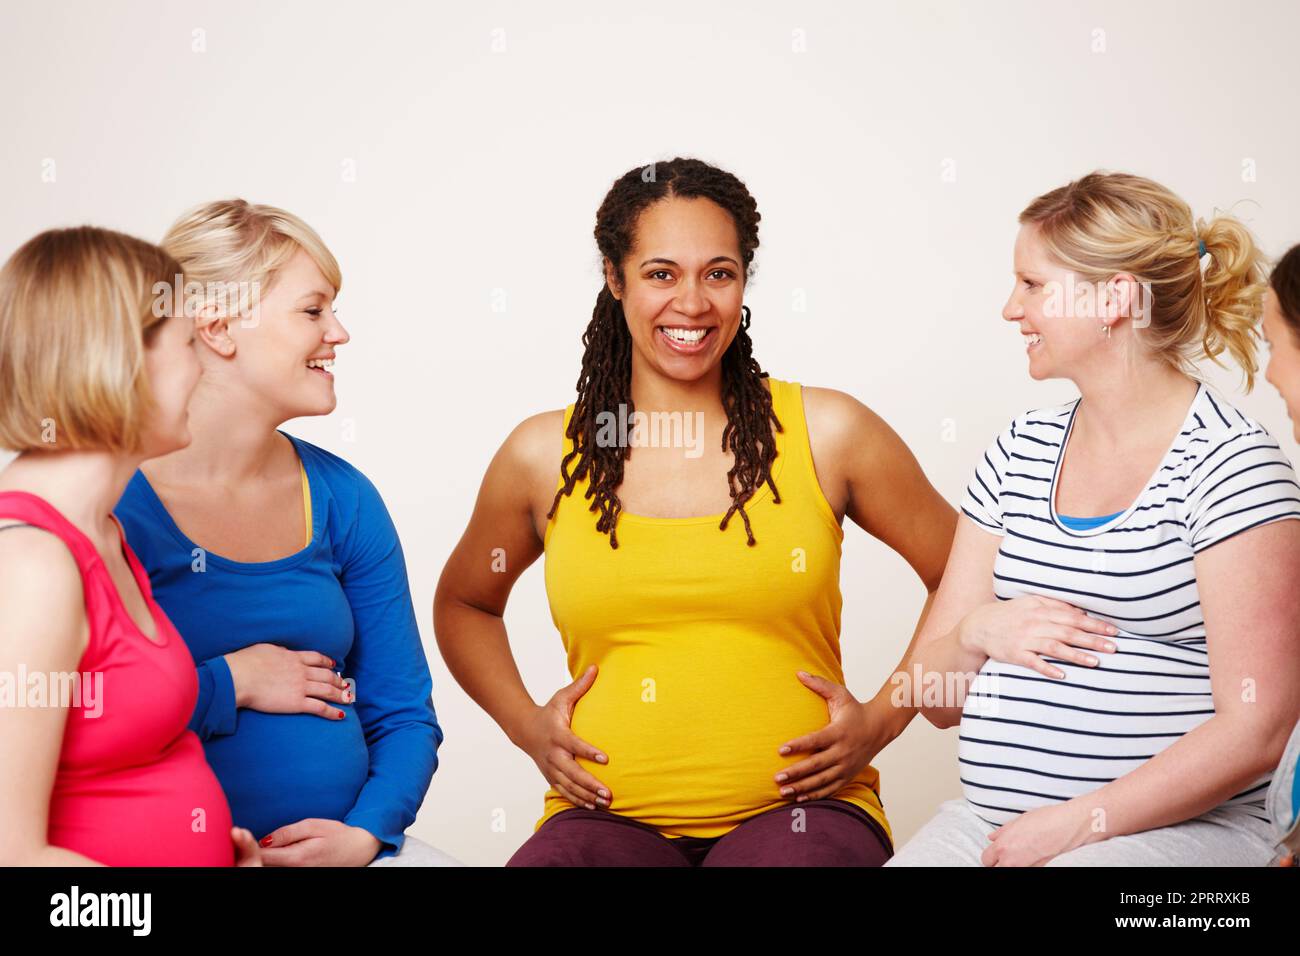 Sharing their experiences. A multi-ethnic group of pregnant women sitting together and having a friendly discussion while one smiles at the camera. Stock Photo